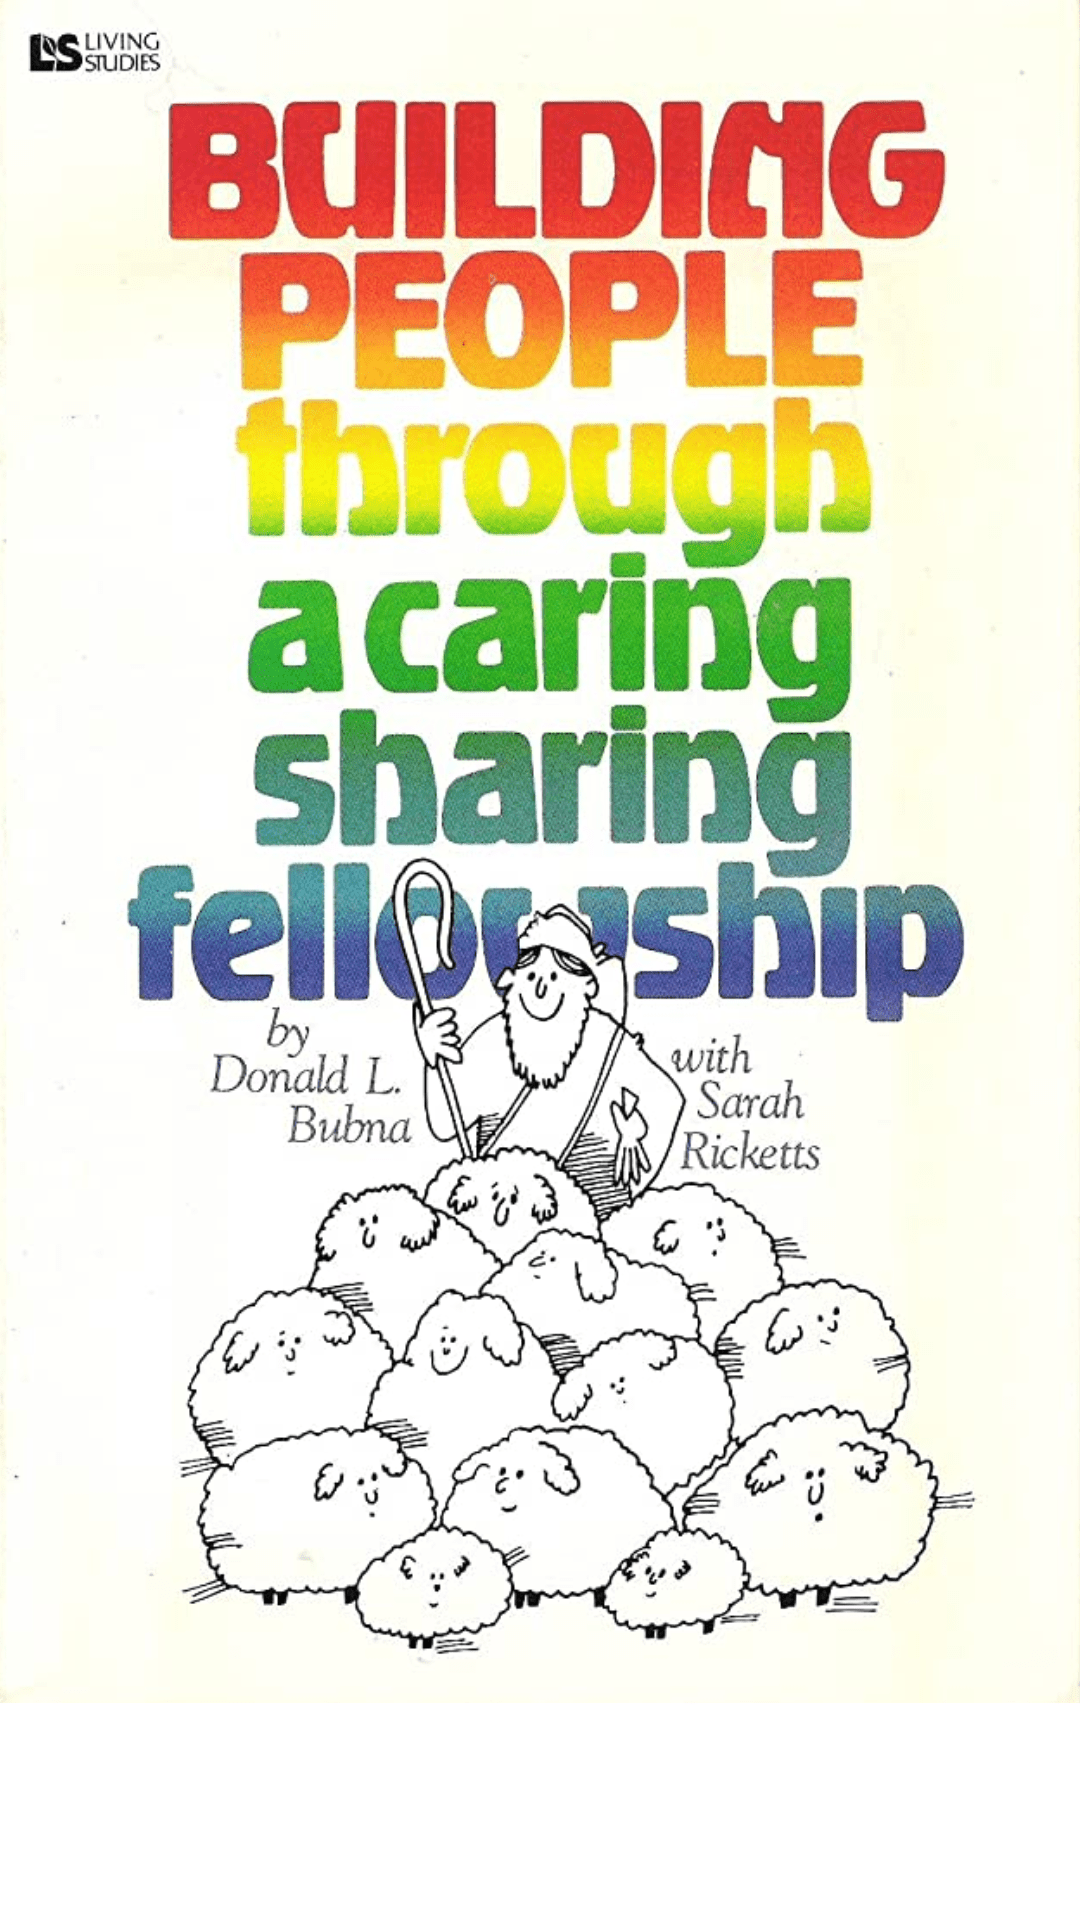 Building People Through a Caring, Sharing Fellowship